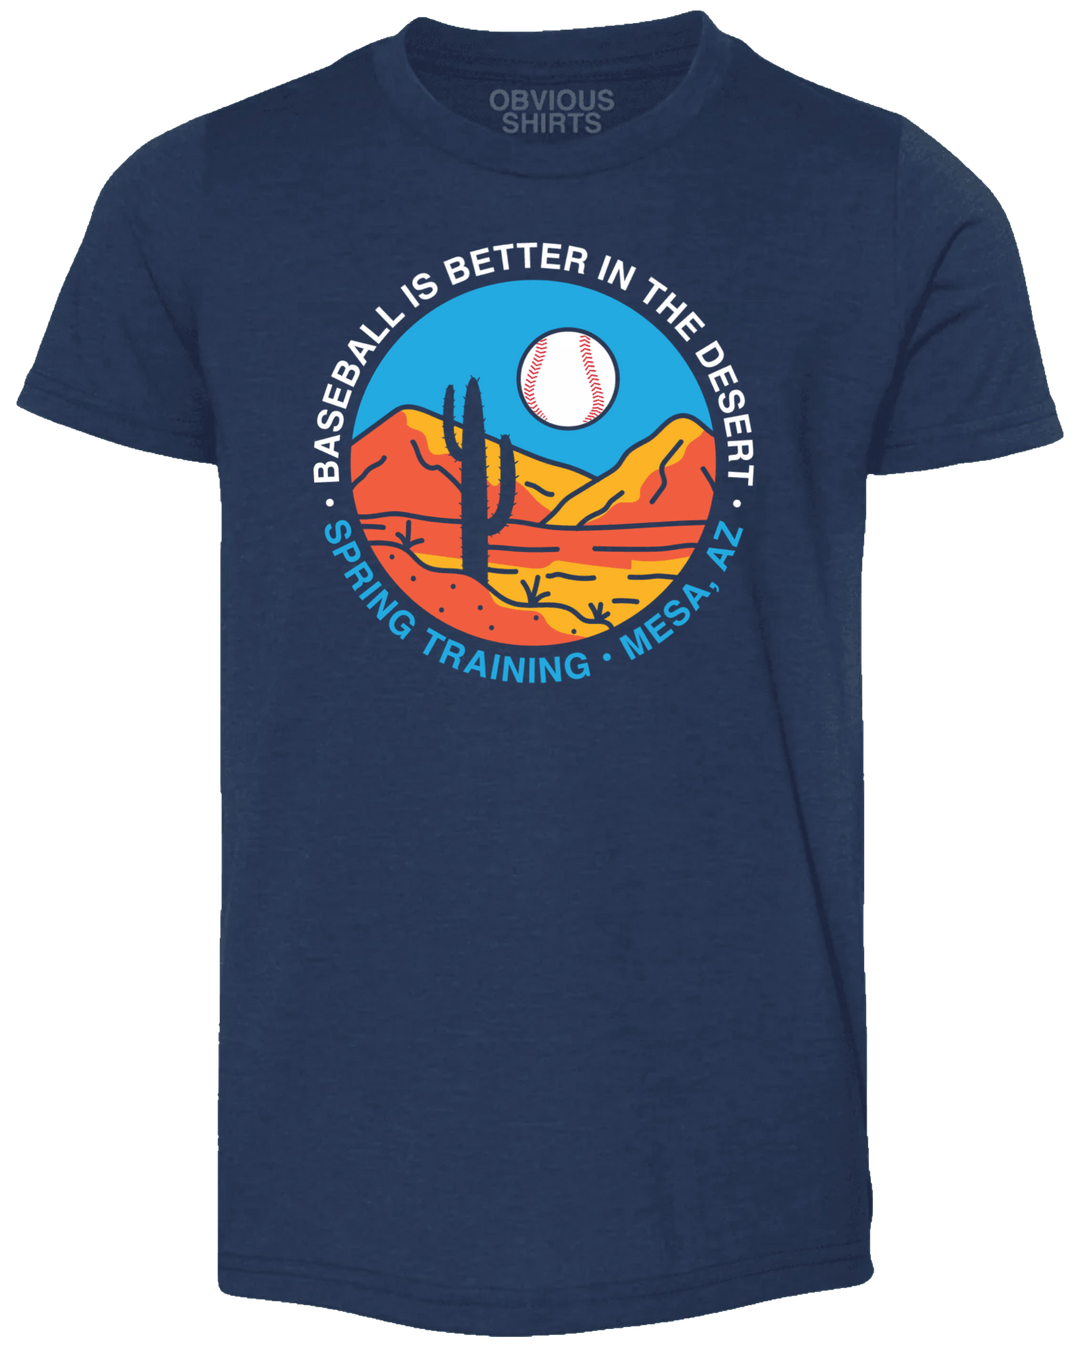 SPRING TRAINING LOGO TEE (YOUTH) - OBVIOUS SHIRTS